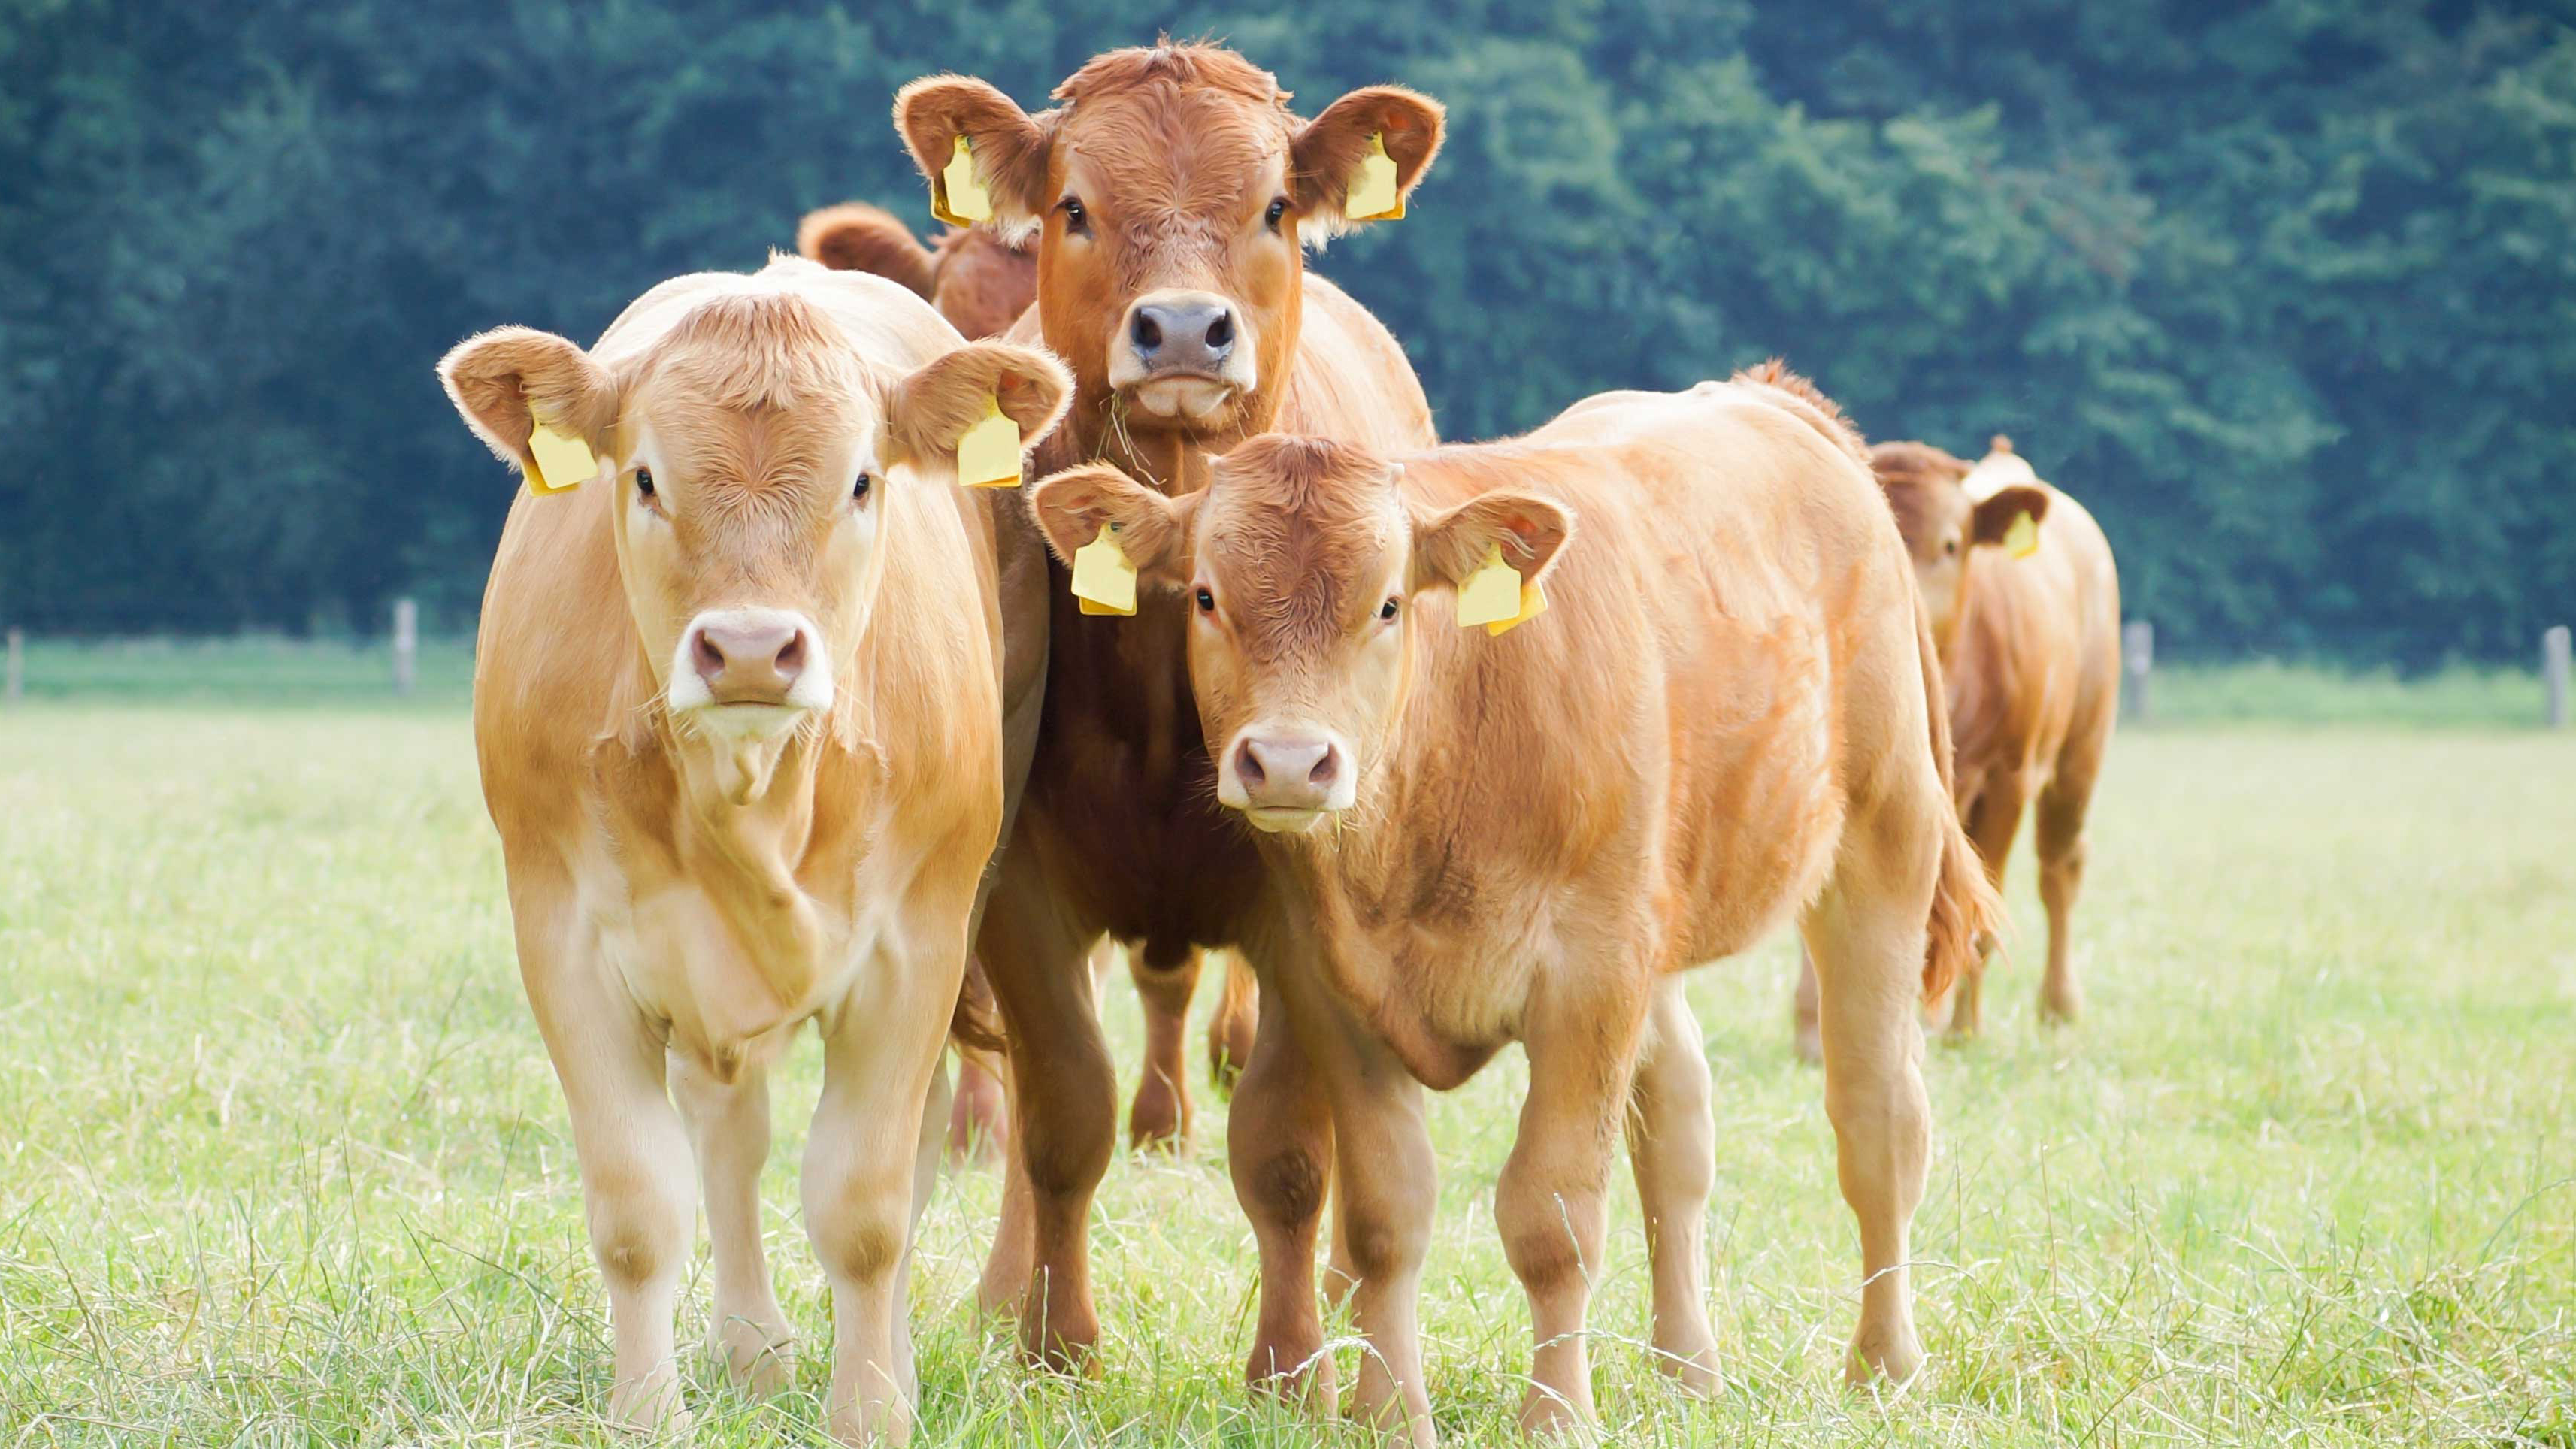 Three brown cows, with yellow tags on their ears, standing in a lush green pasture and looking in your direction.